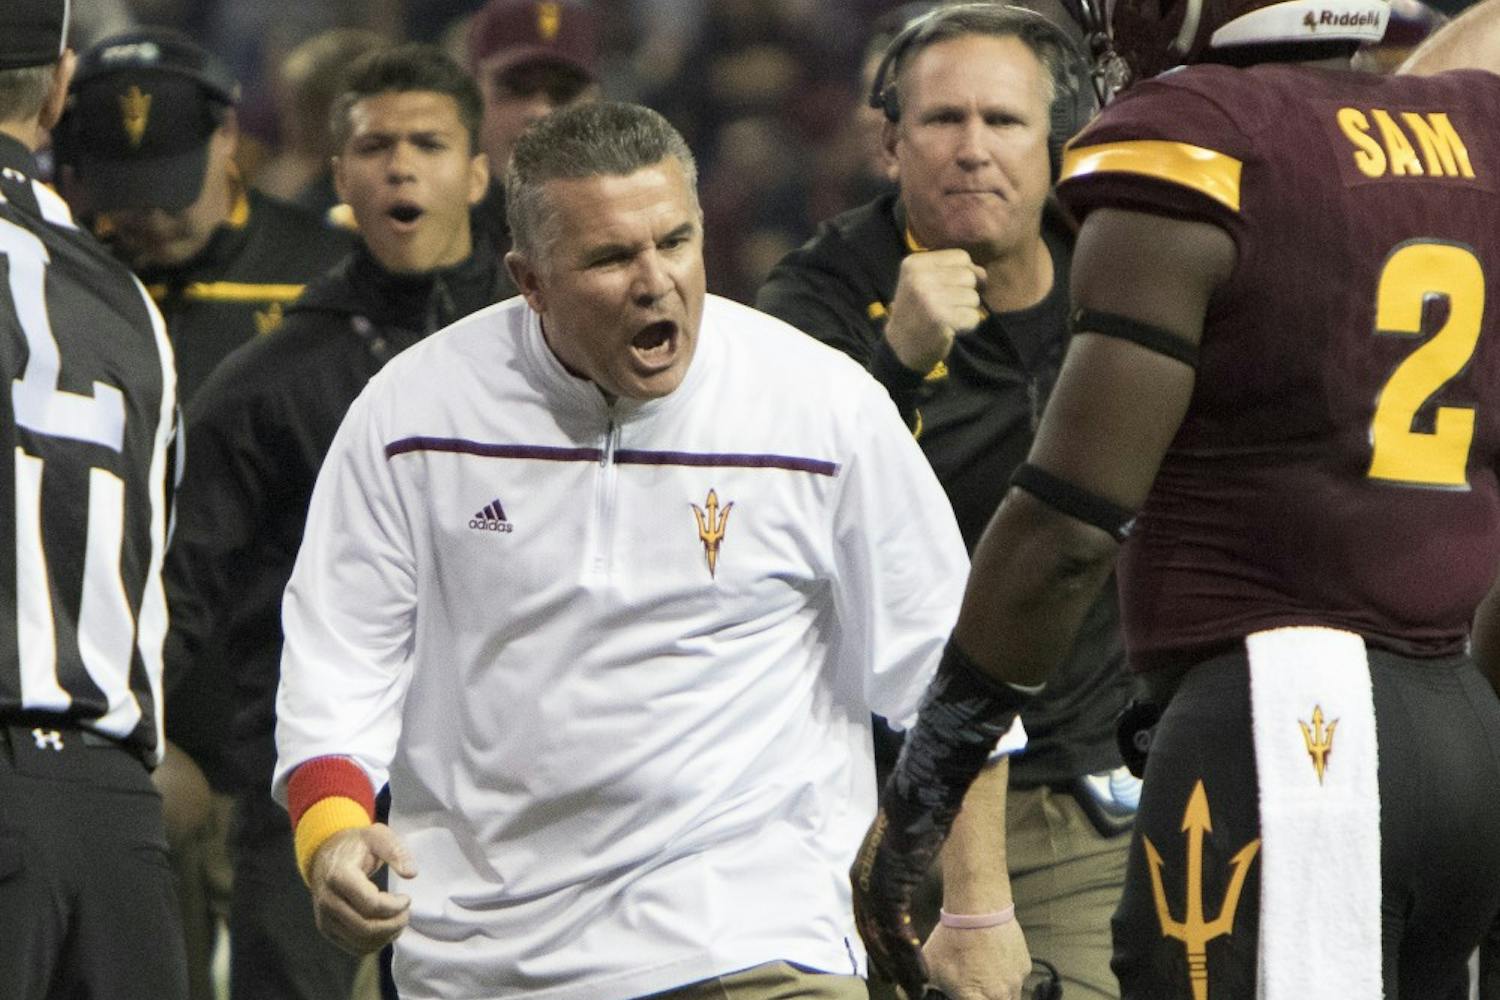 ASU head coach Todd Graham reacts after a play during the Motel 6 Cactus Bowl on Saturday, Jan. 2, 2016, at Chase Field in Phoenix.  